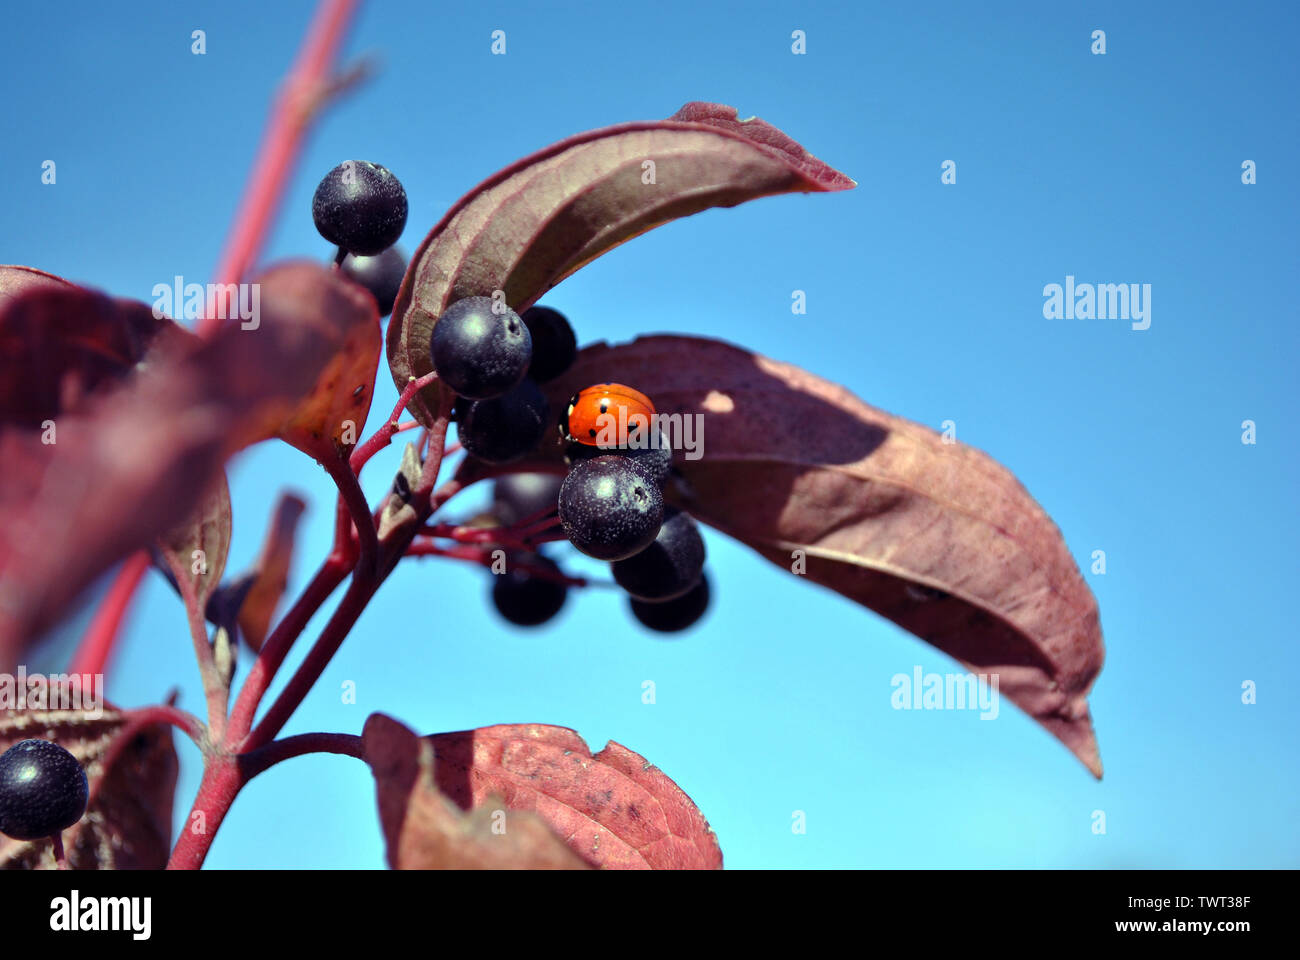 Frangula alnus (alder buckthorn, glossy buckthorn, breaking buckthorn) branch with black berries and small red ladybug on it, red leaves on the blue s Stock Photo